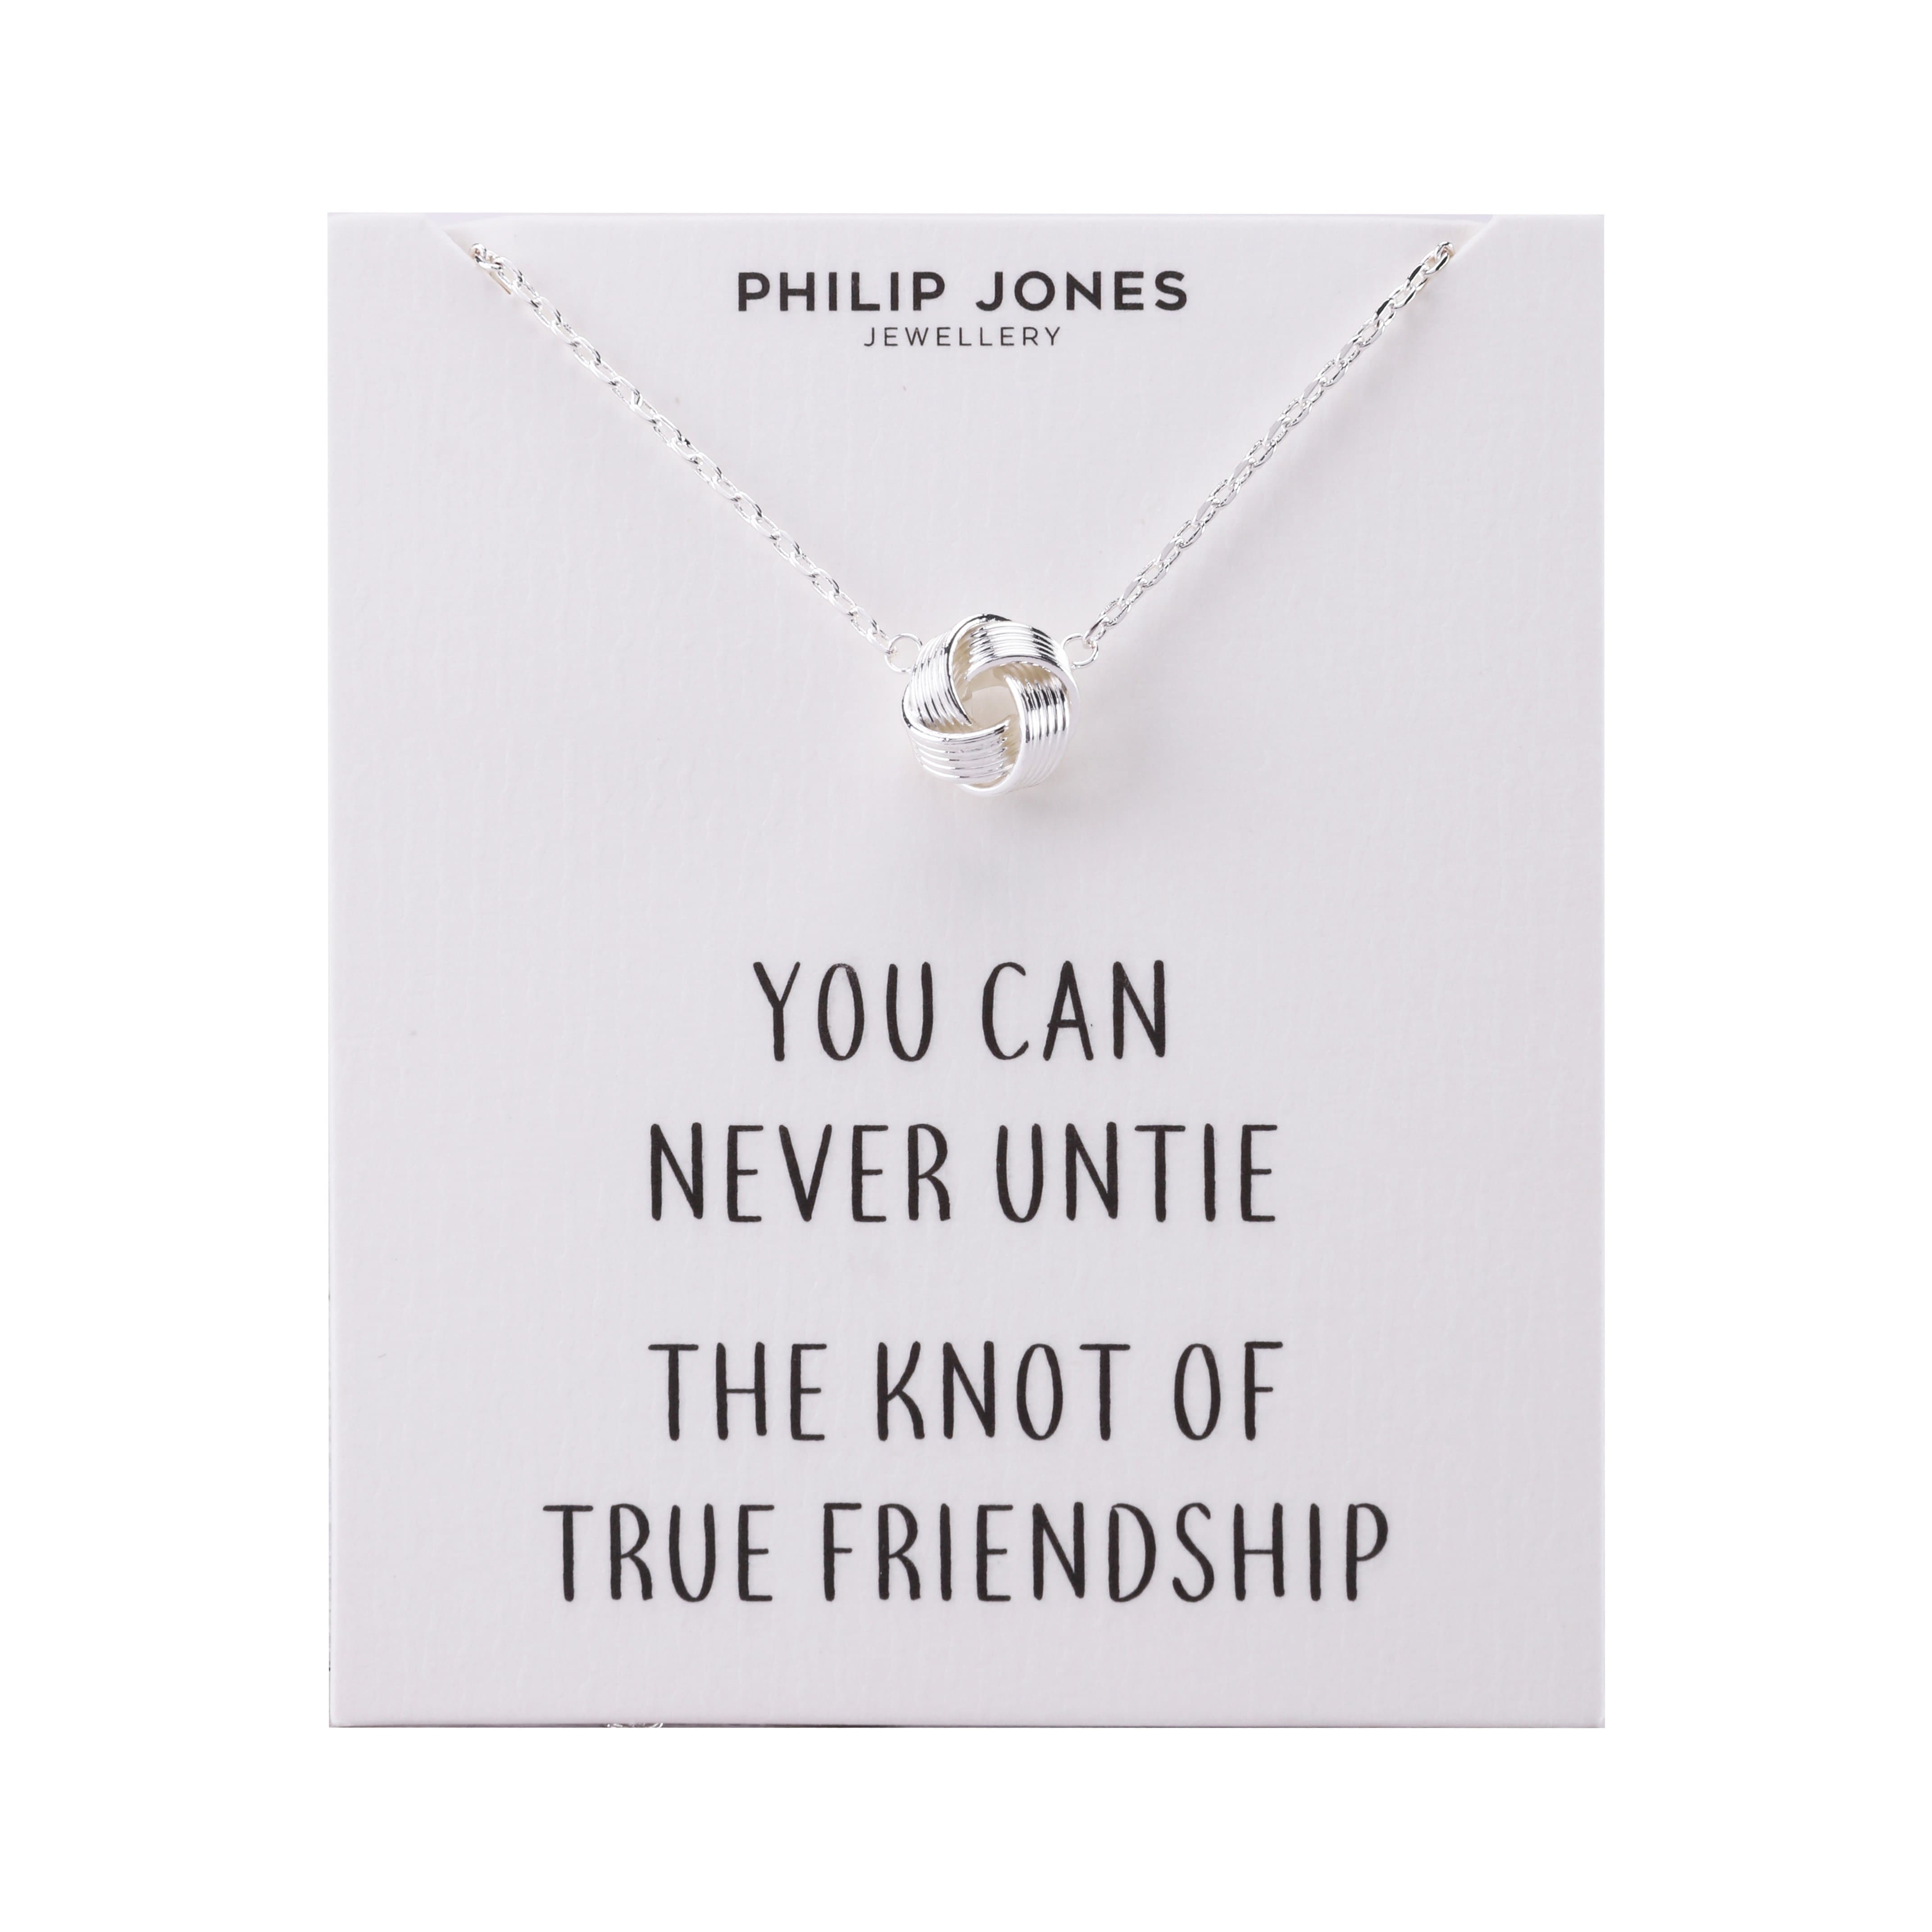 Silver Plated Love Knot Necklace with Quote Card by Philip Jones Jewellery